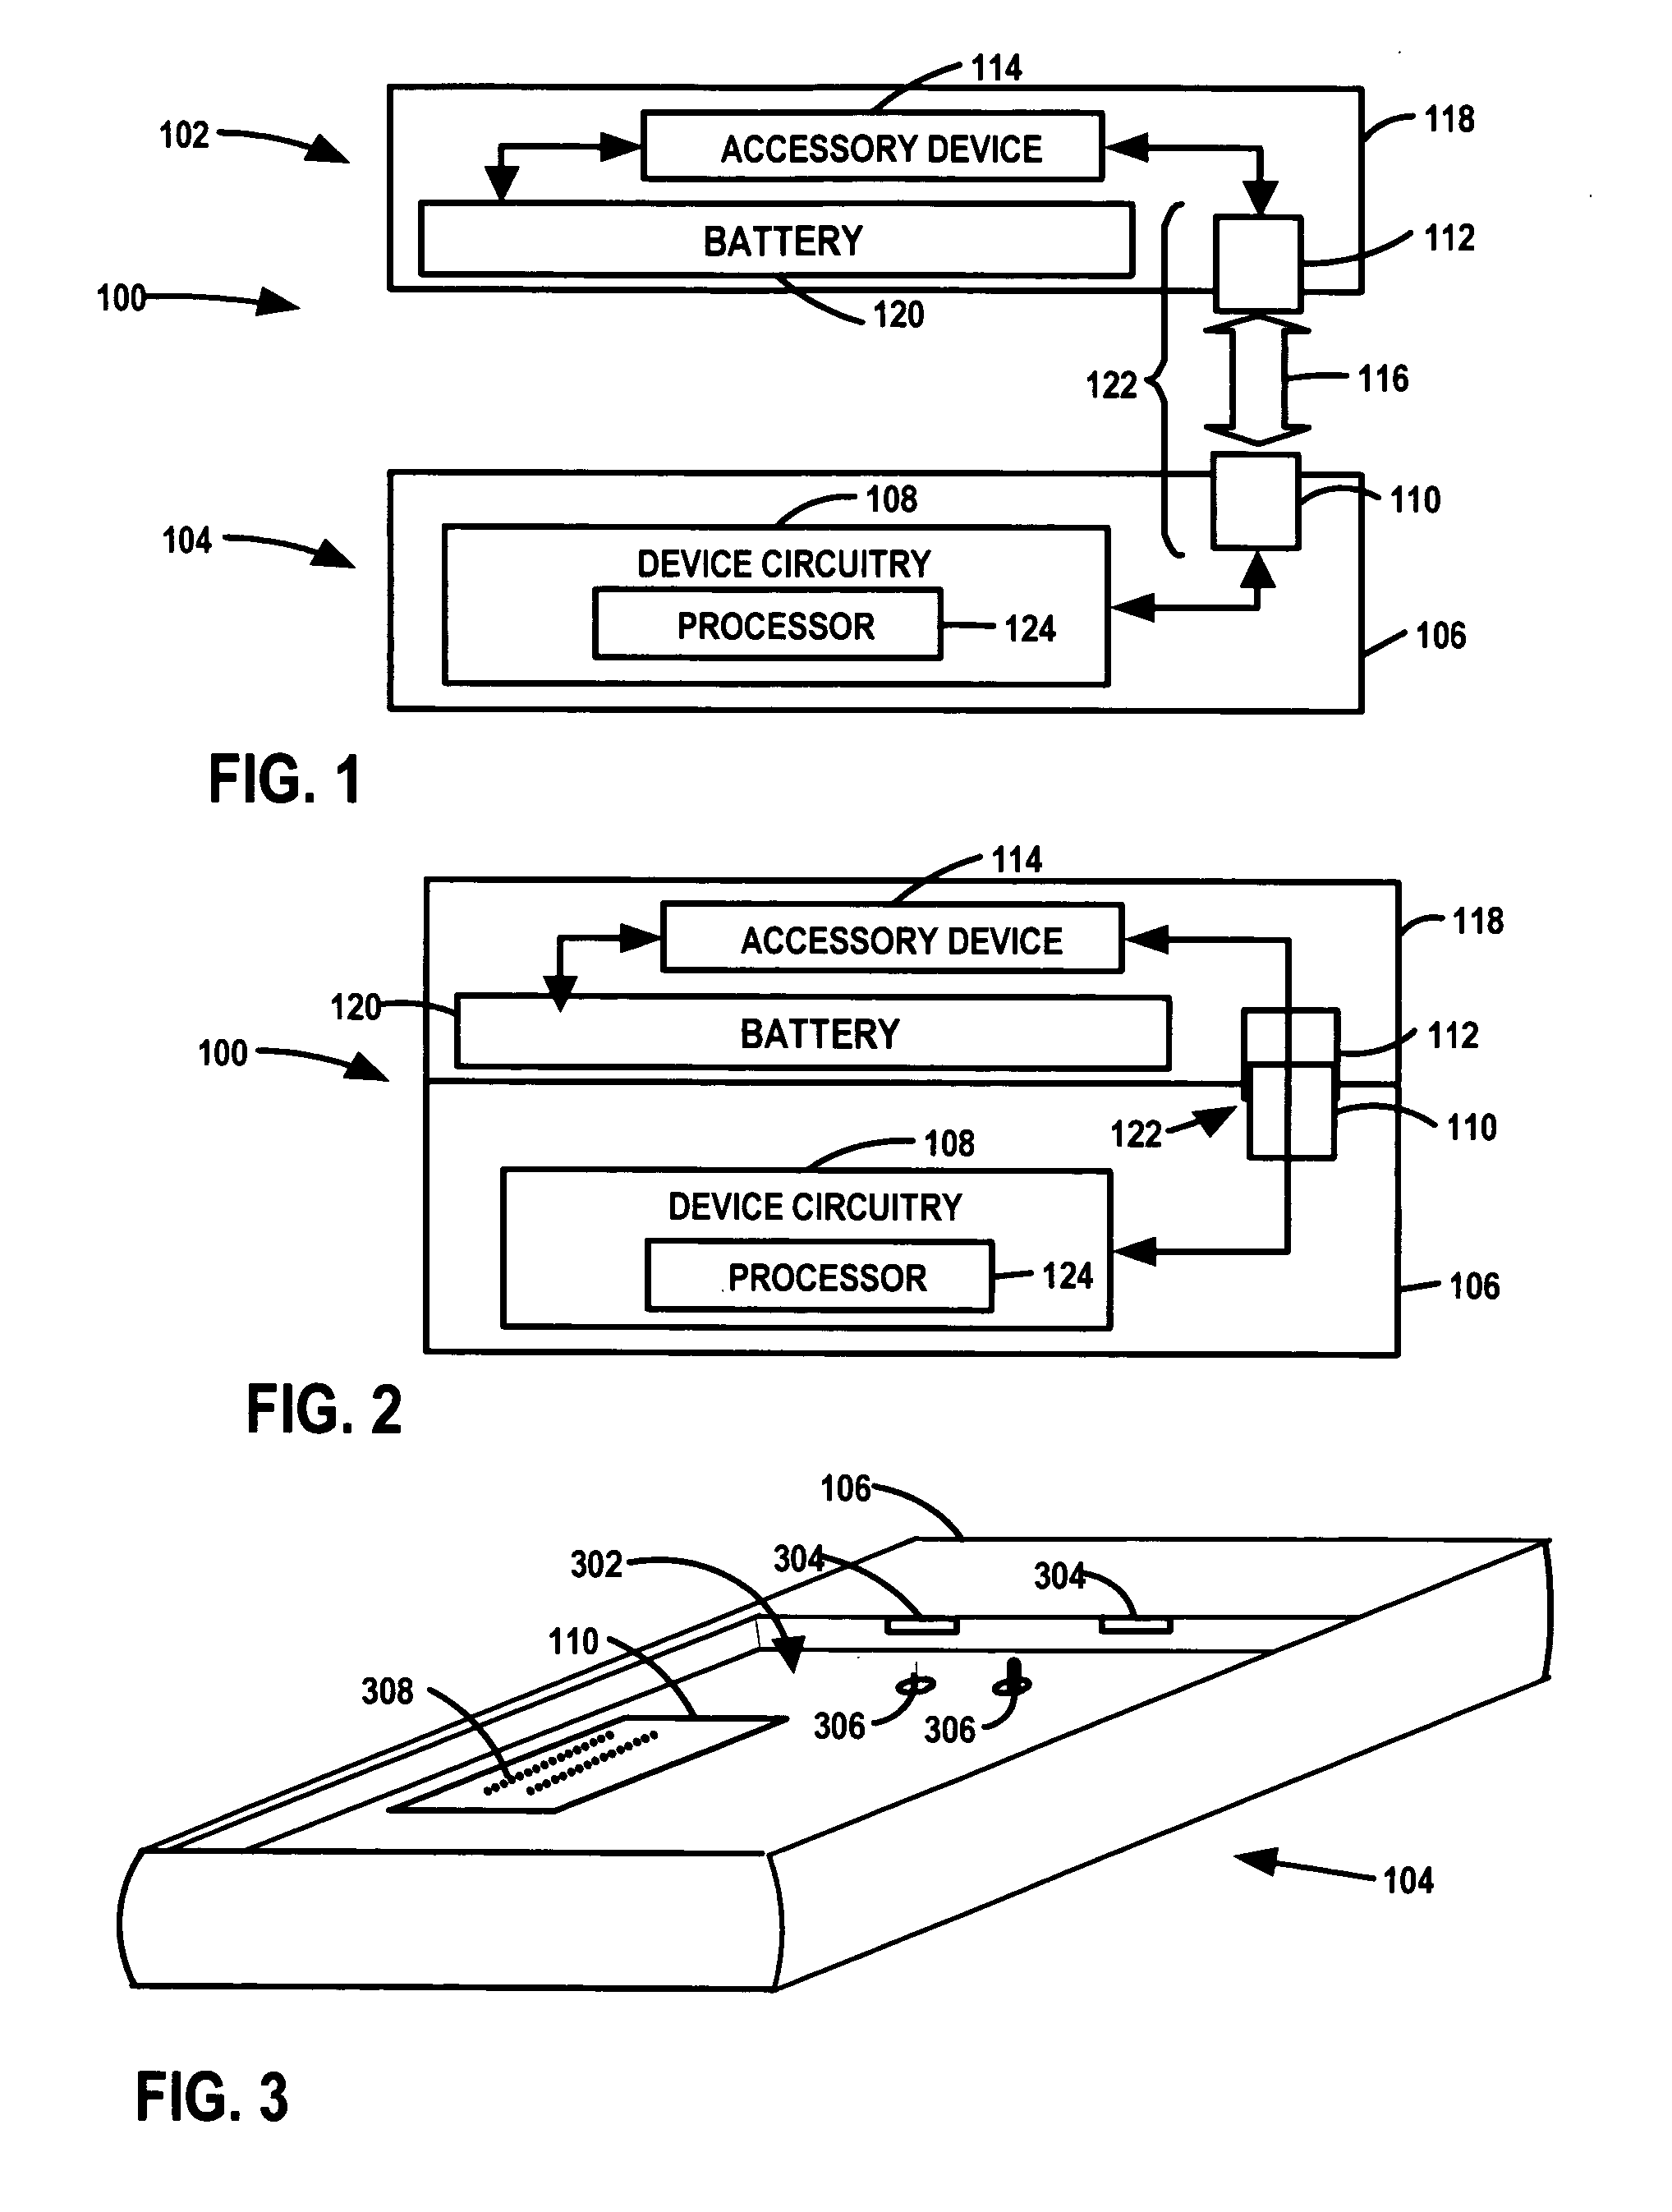 Portable communication device and system with interchangeable accessory modules